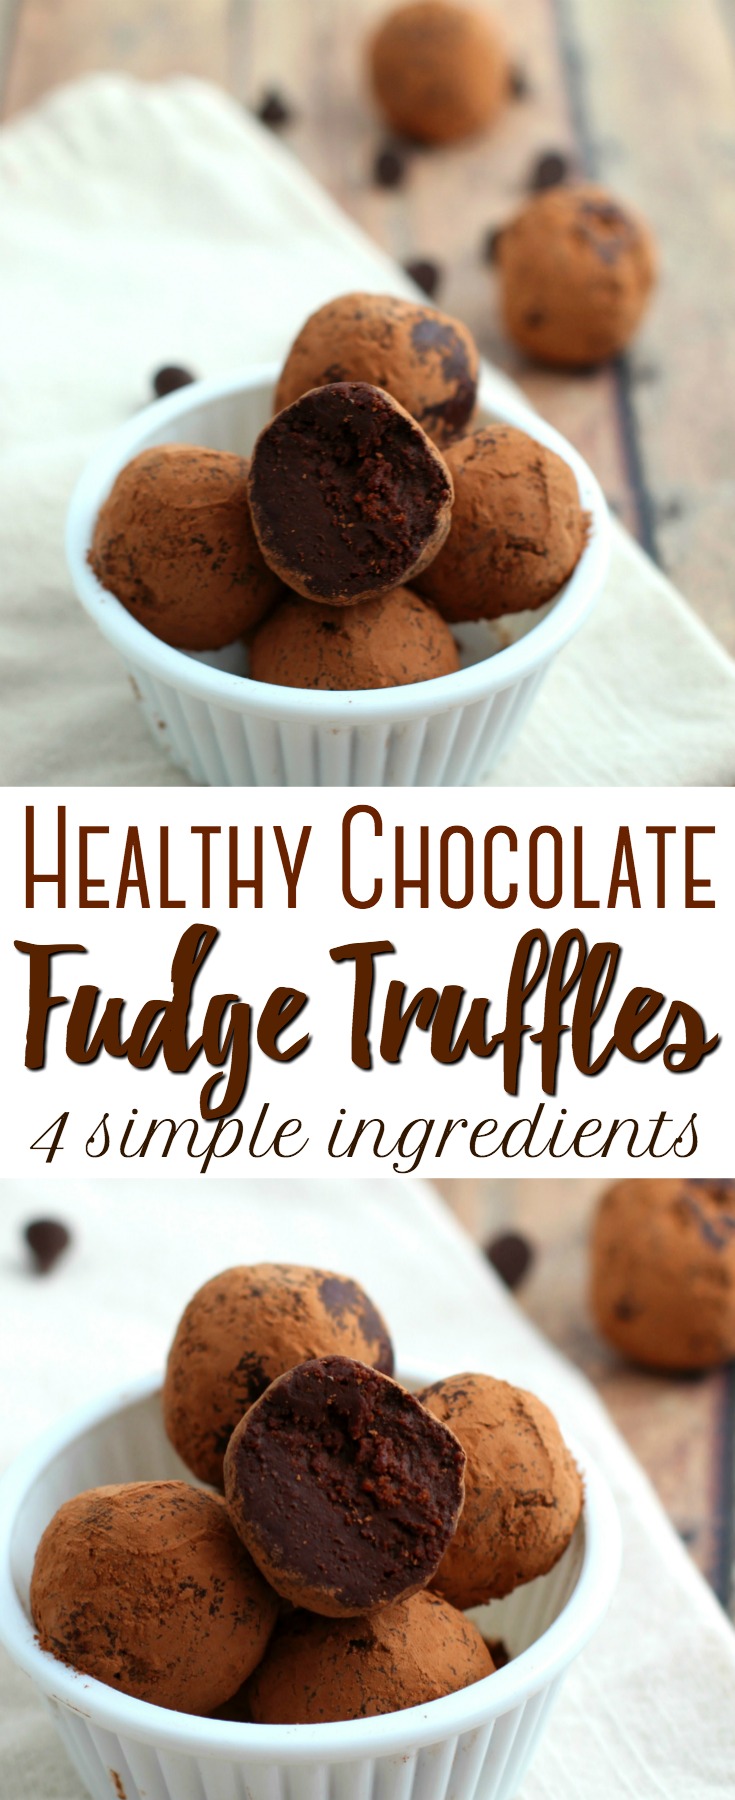 These Healthy Chocolate Fudge Truffles taste like heaven in a bite size snack! They are made quite easily with 4 simple ingredients!